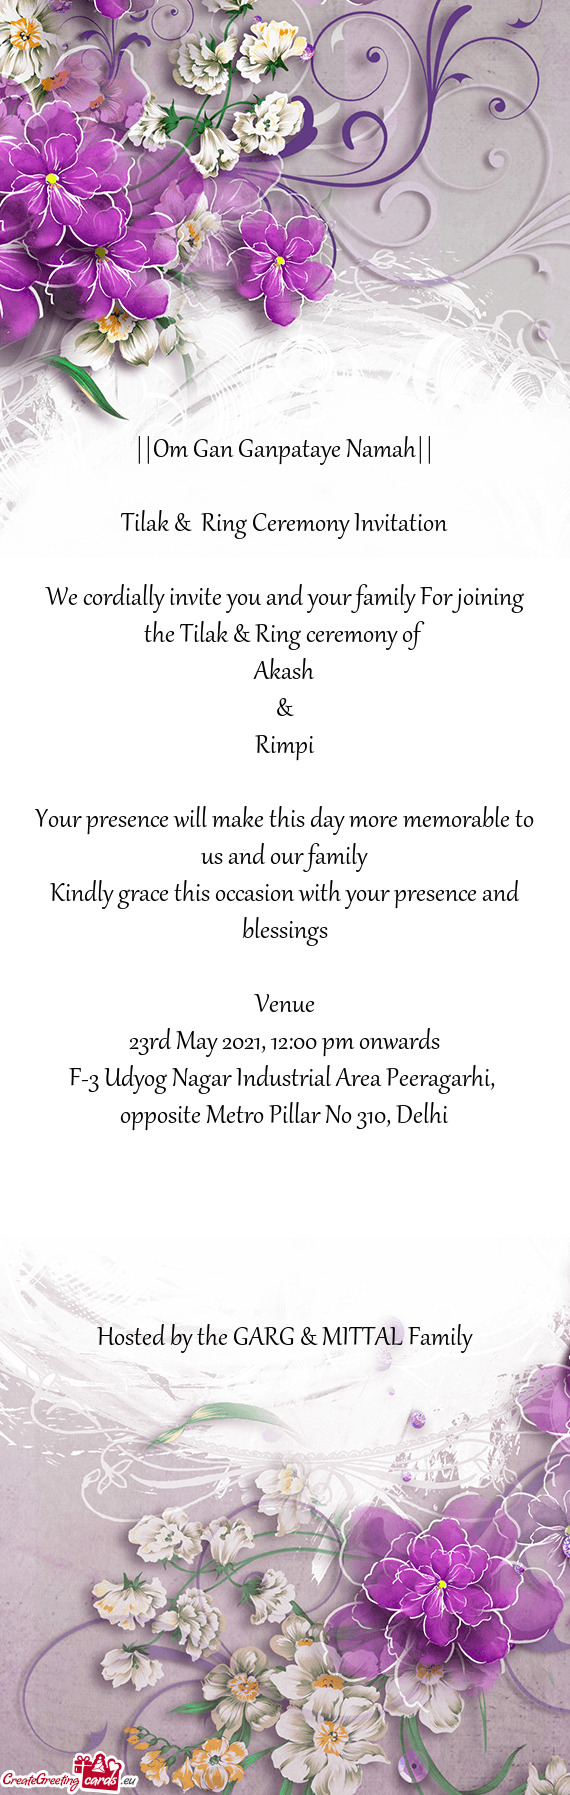 We cordially invite you and your family For joining the Tilak & Ring ceremony of